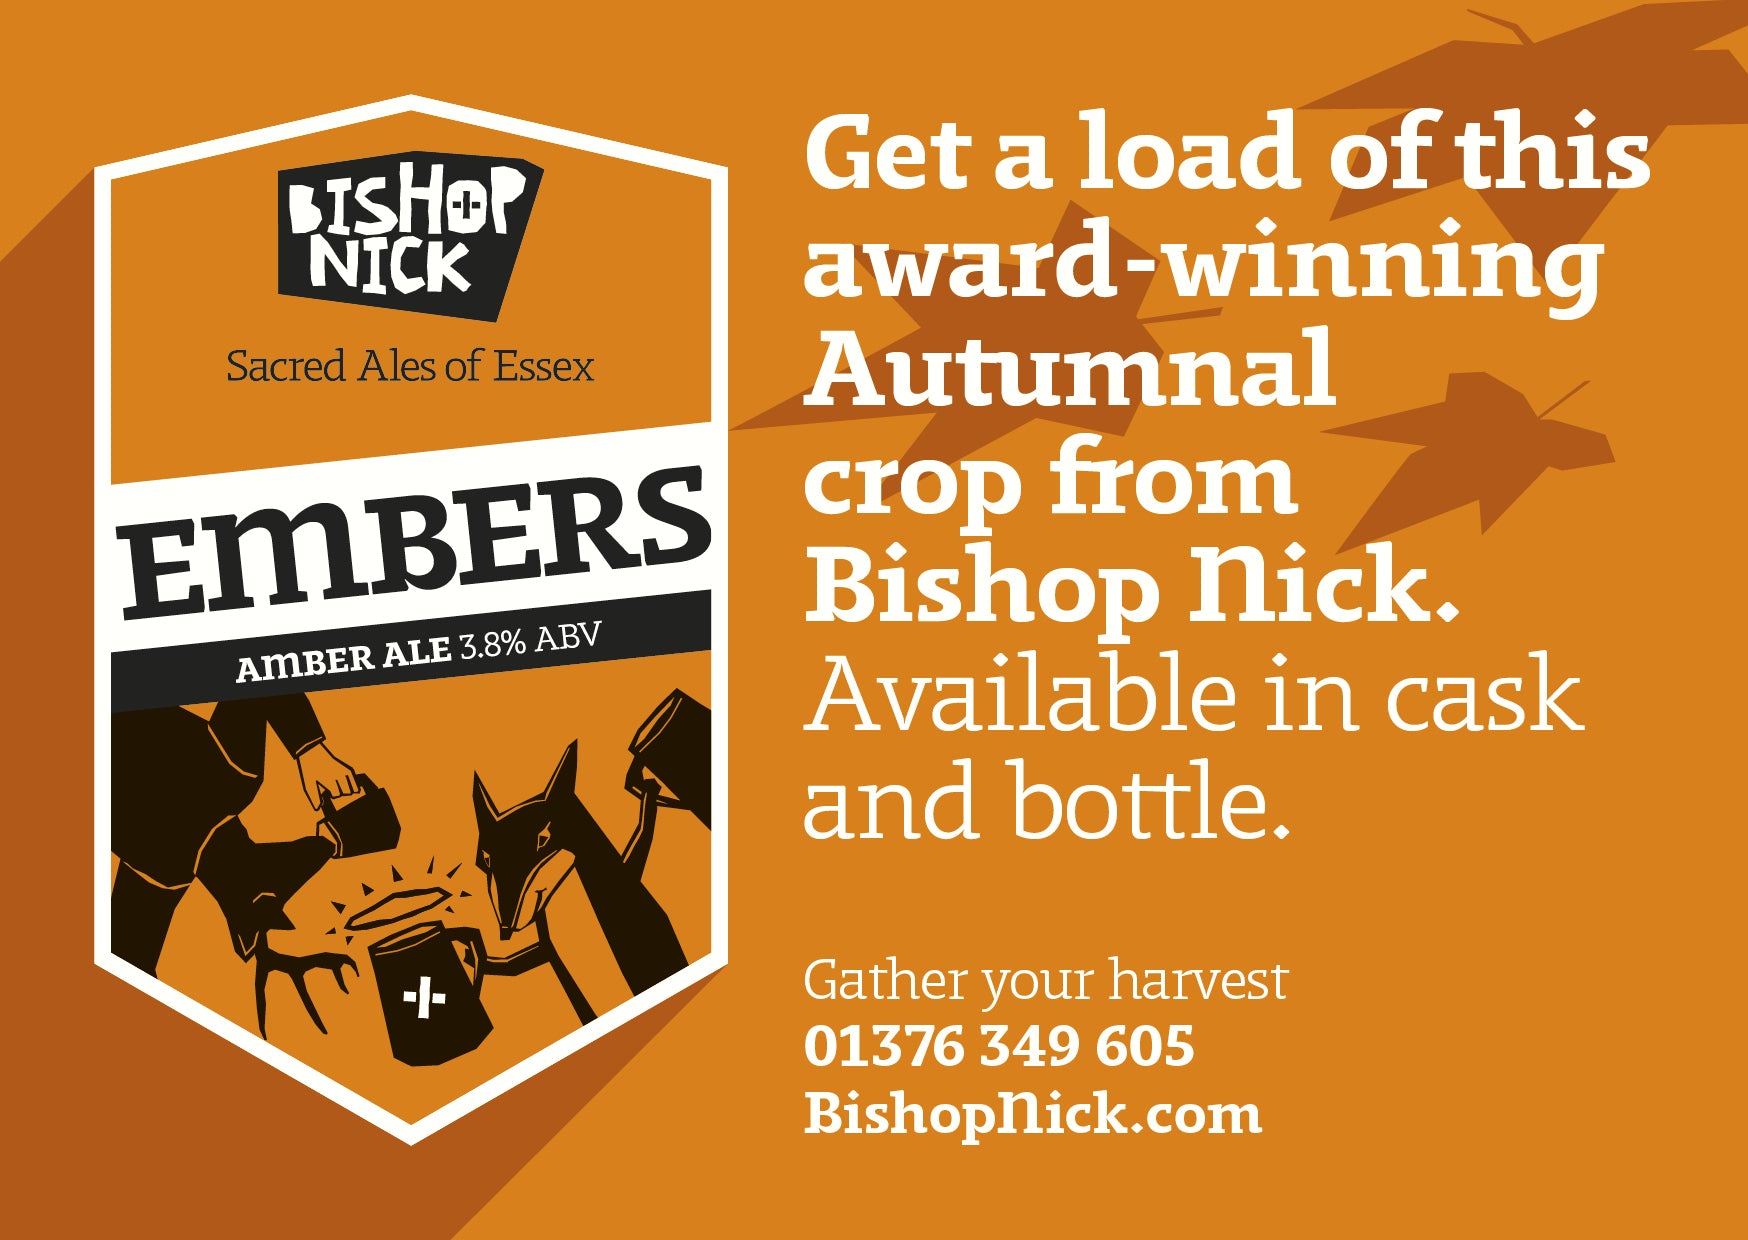 Our award-winning amber ale is back